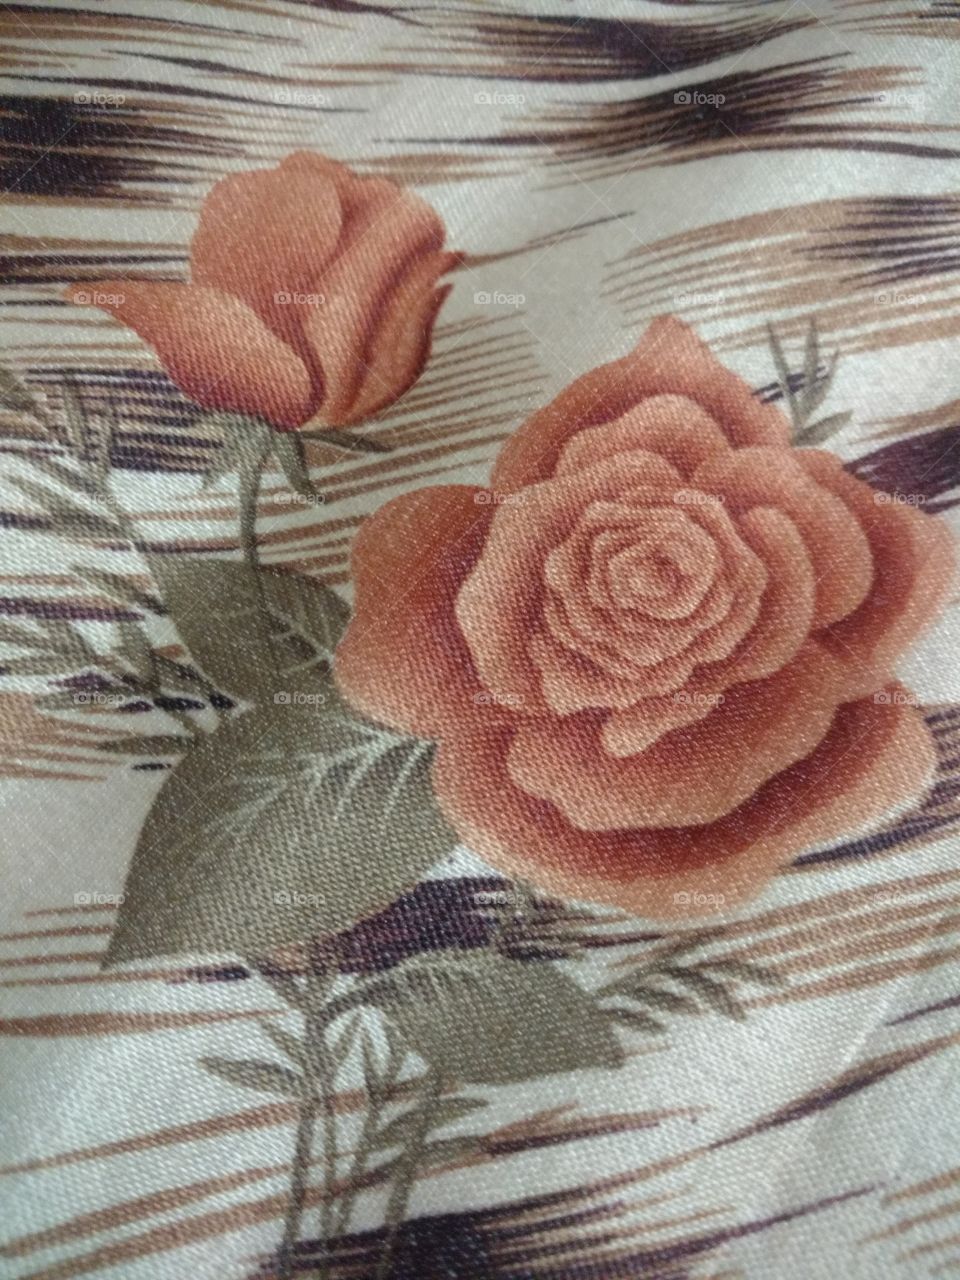 Rose print on the bedsheet.